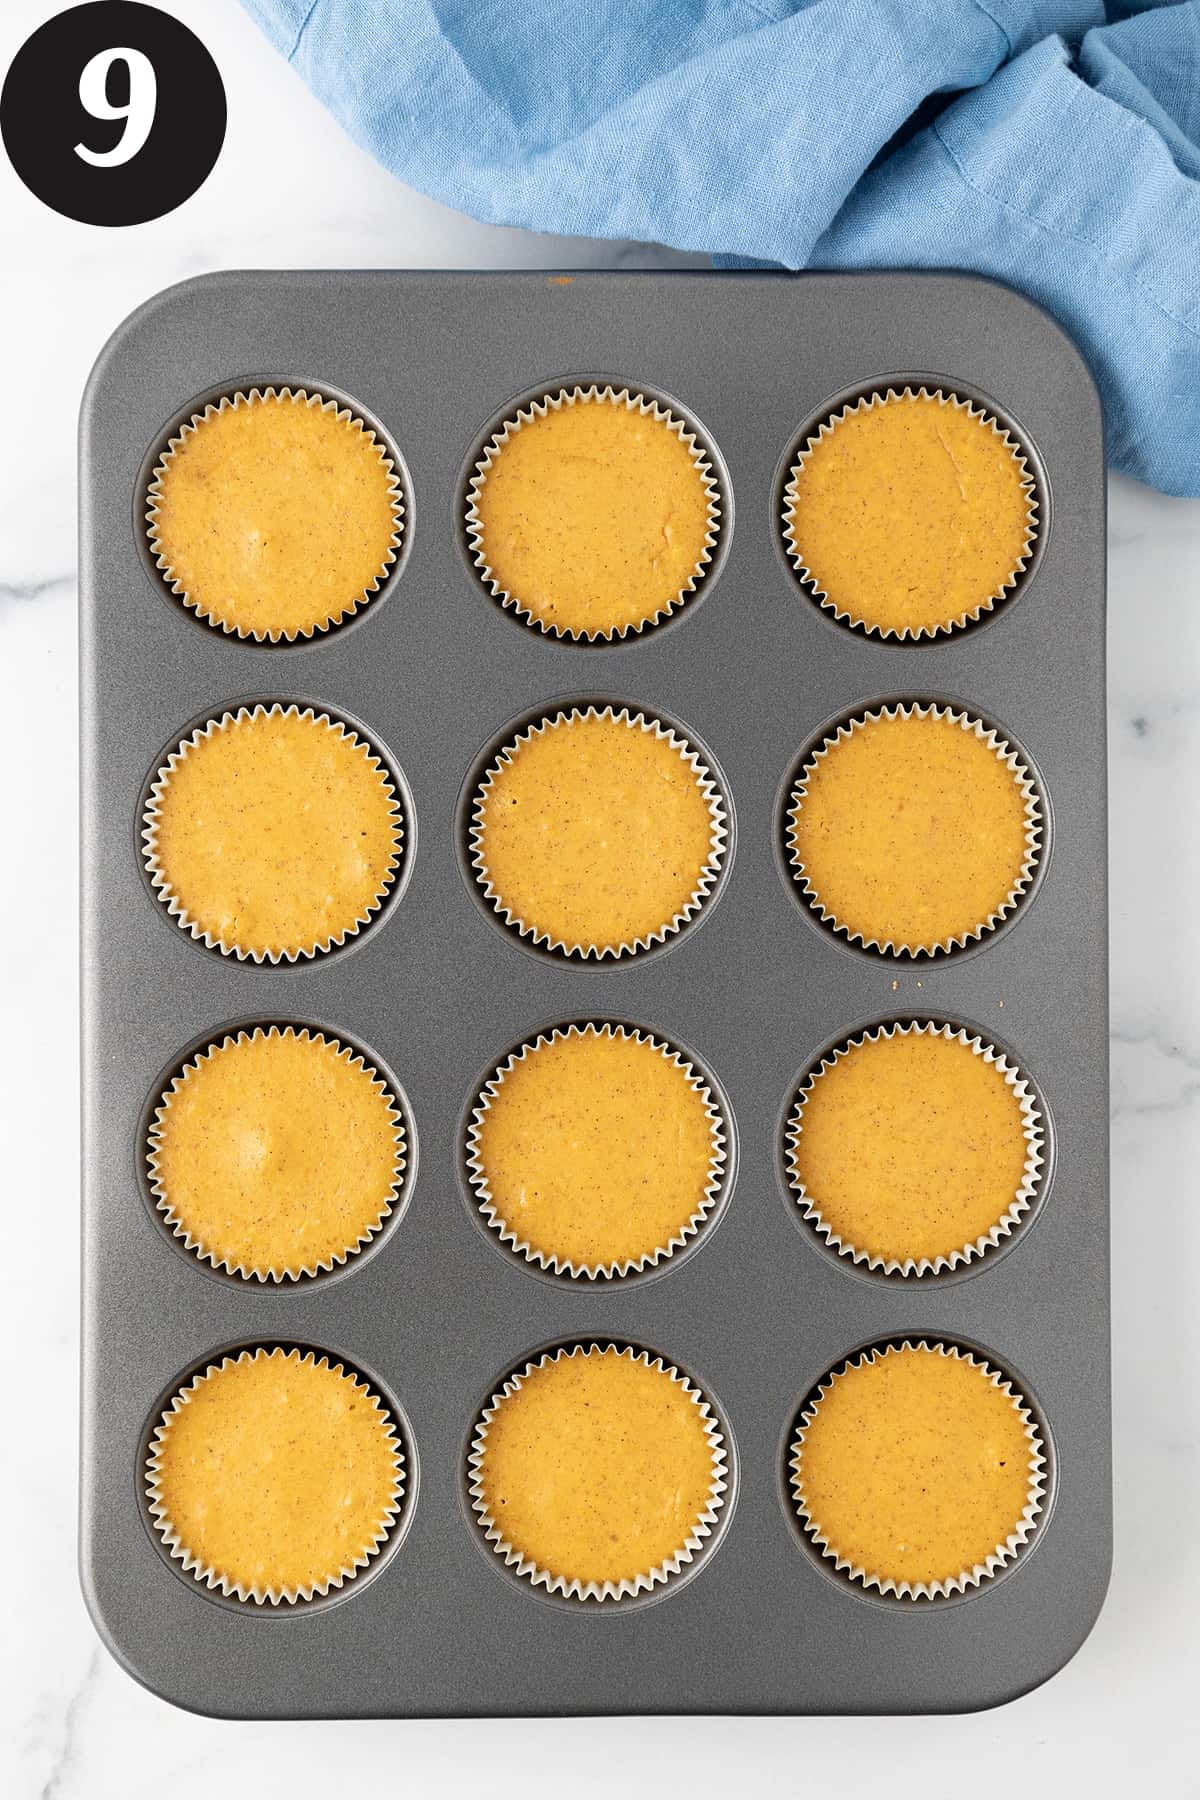 Twelve small pumpkin cheesecakes that have been cooked in a muffin pan resting on a white counter top.